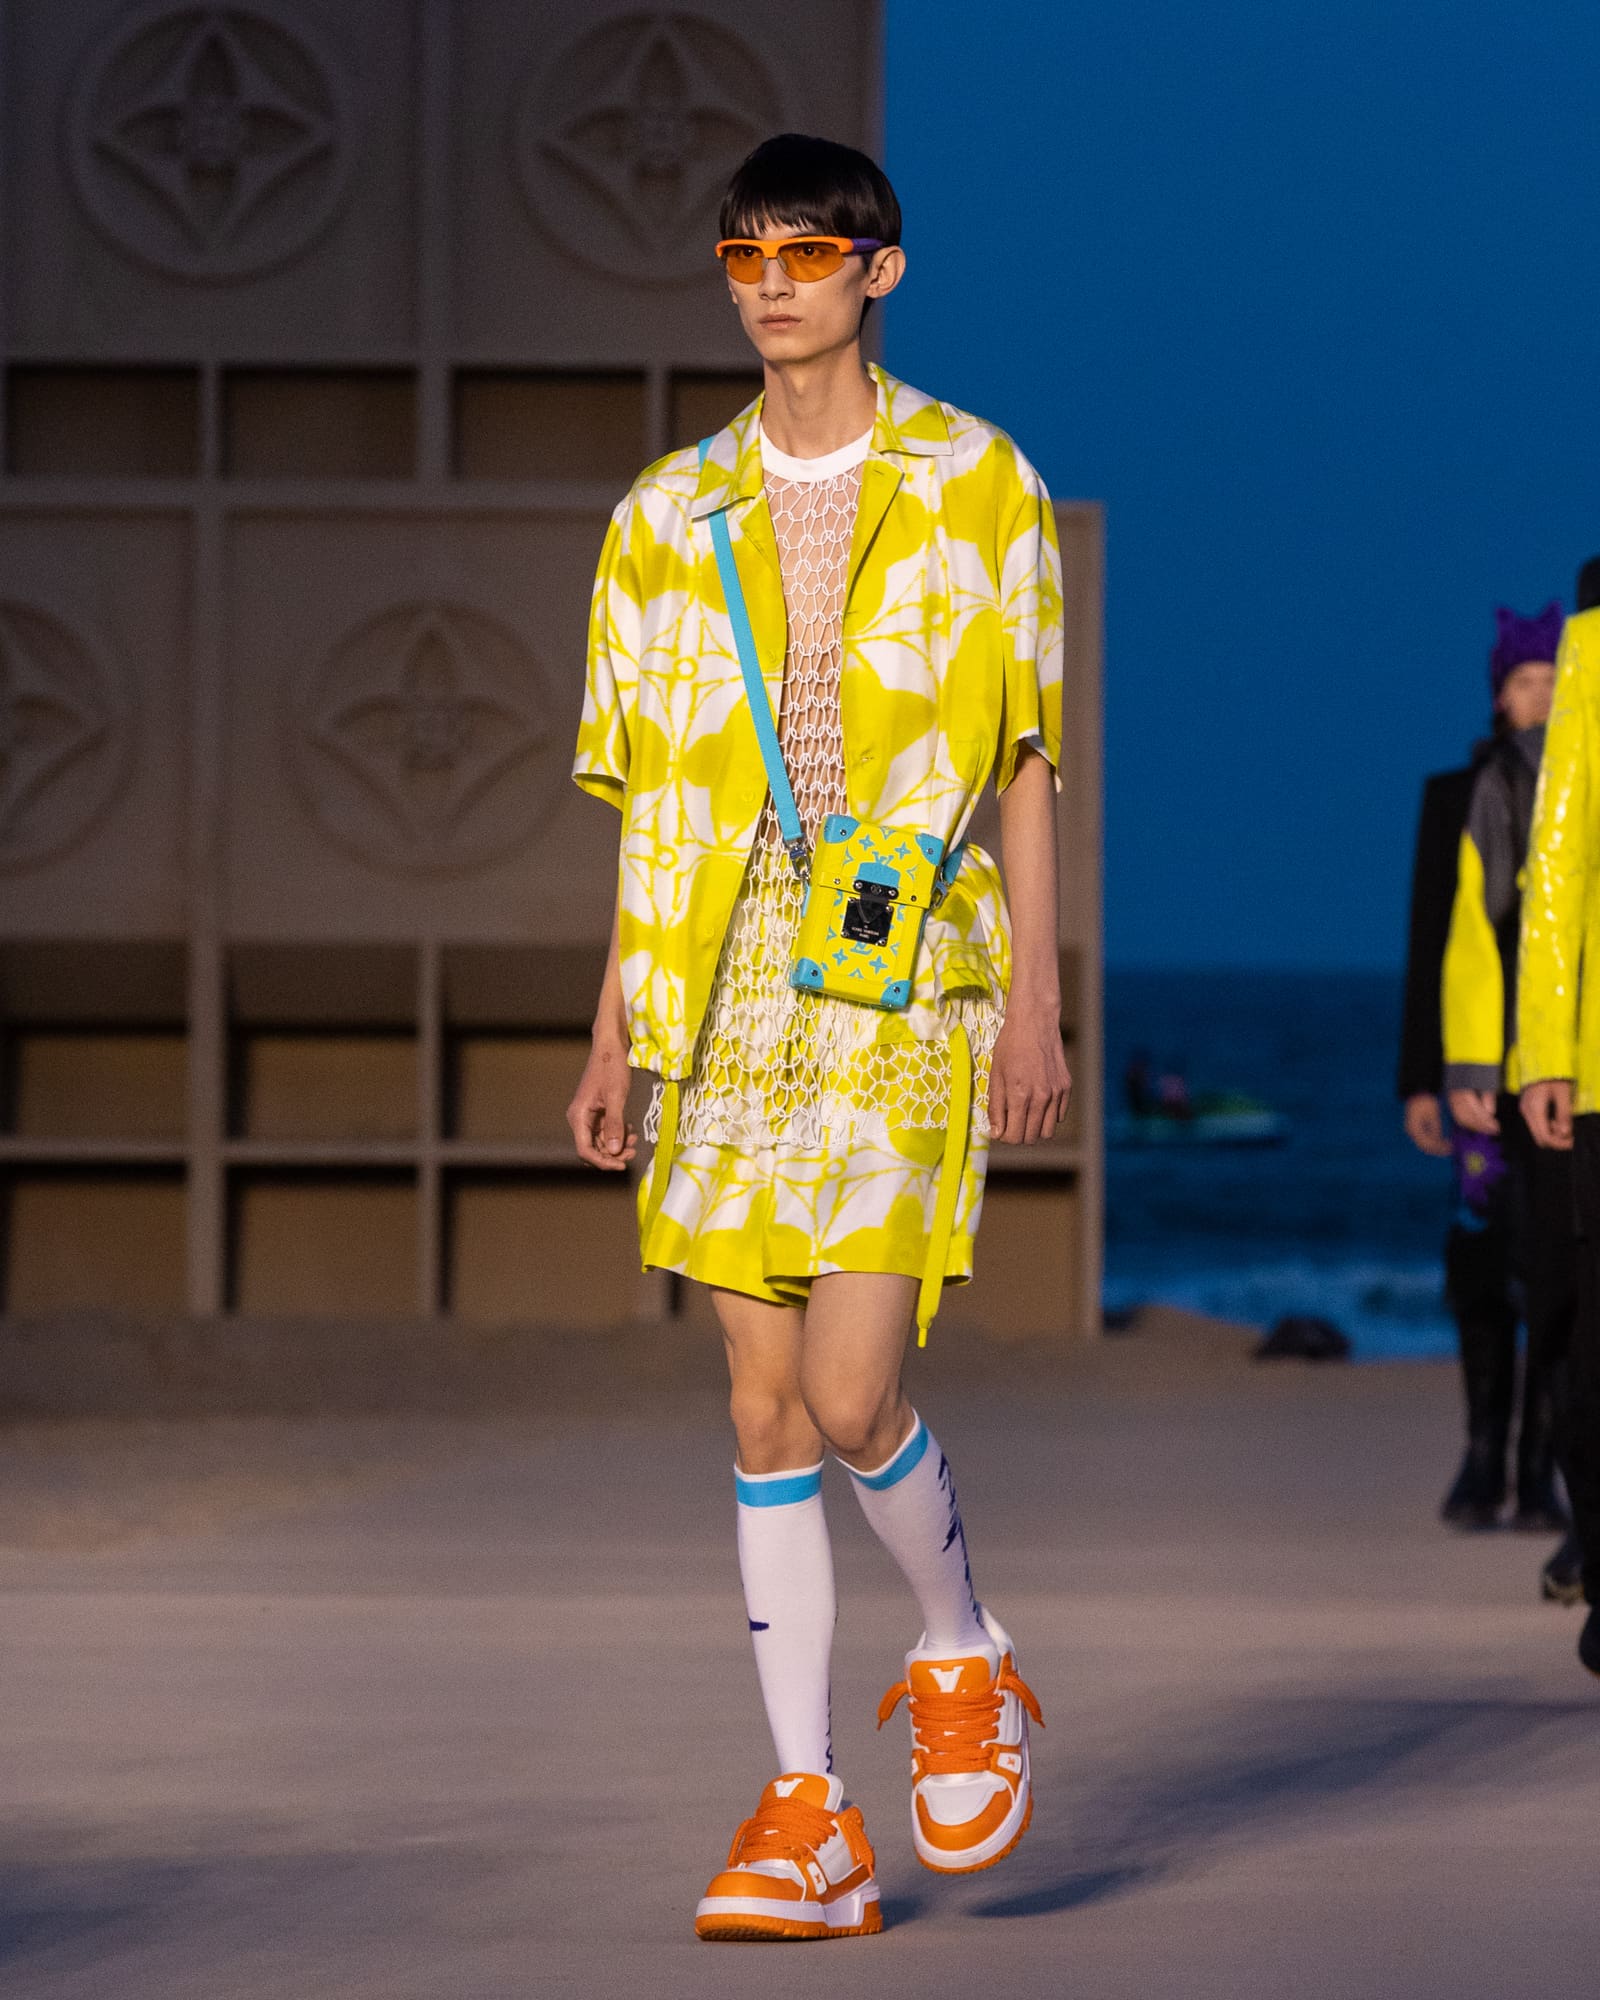 A look at all the elements at the Louis Vuitton Men's SS23 Spin